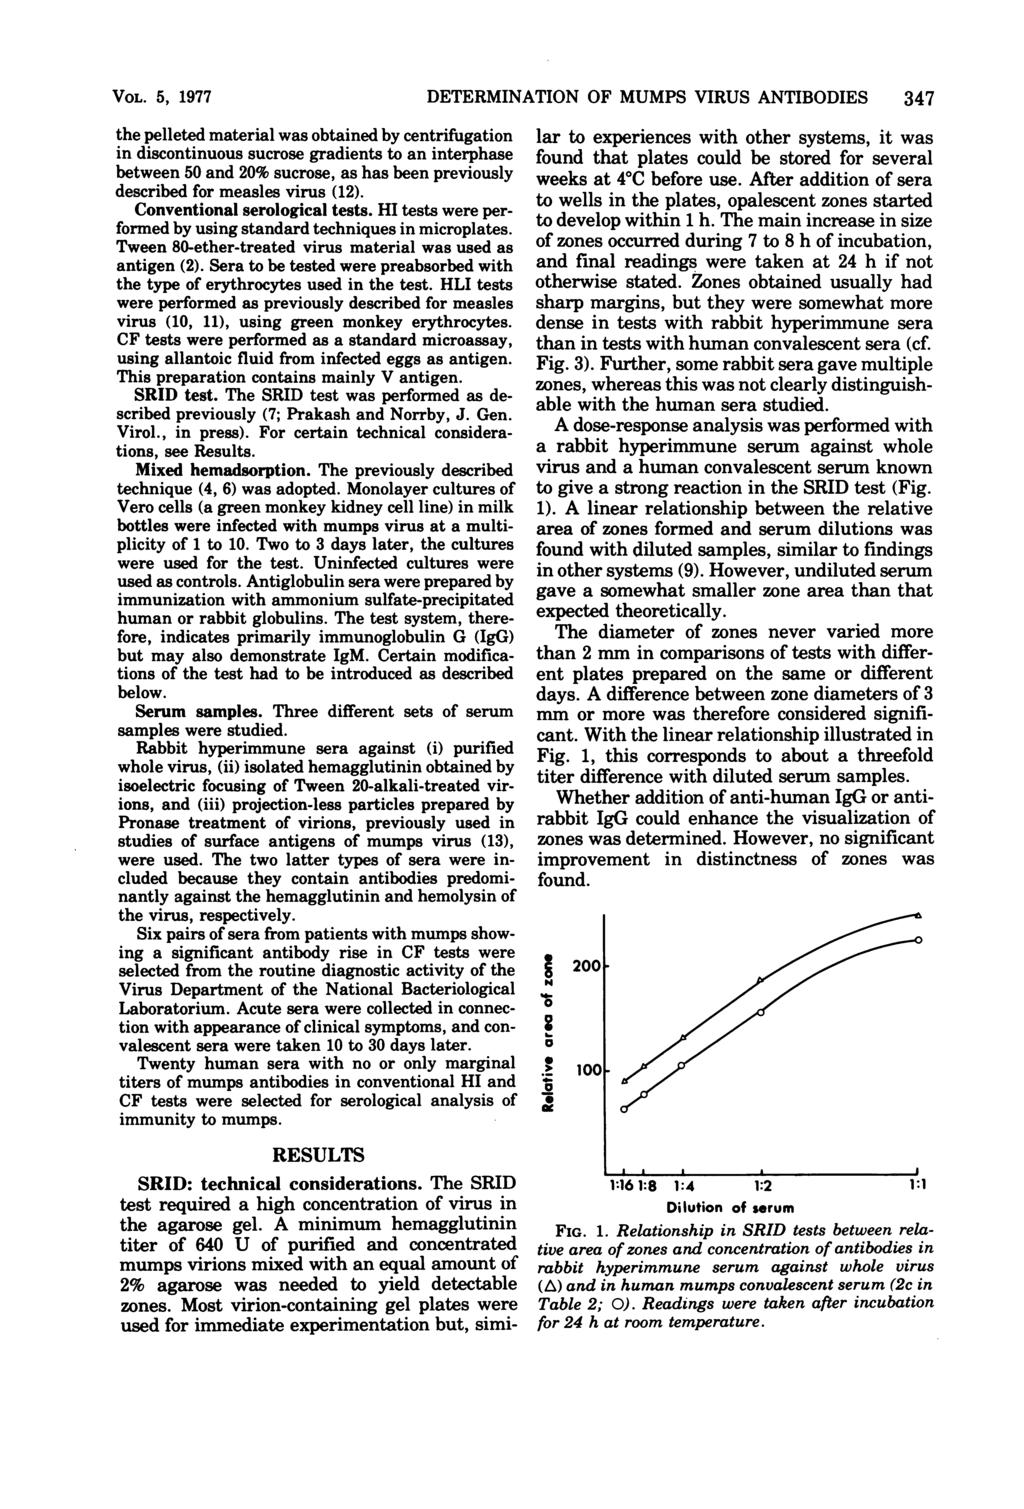 VOL. 5, 1977 the pelleted material was obtained by centrifugation in discontinuous sucrose gradients to an interphase between 50 and 20% sucrose, as has been previously described for measles virus